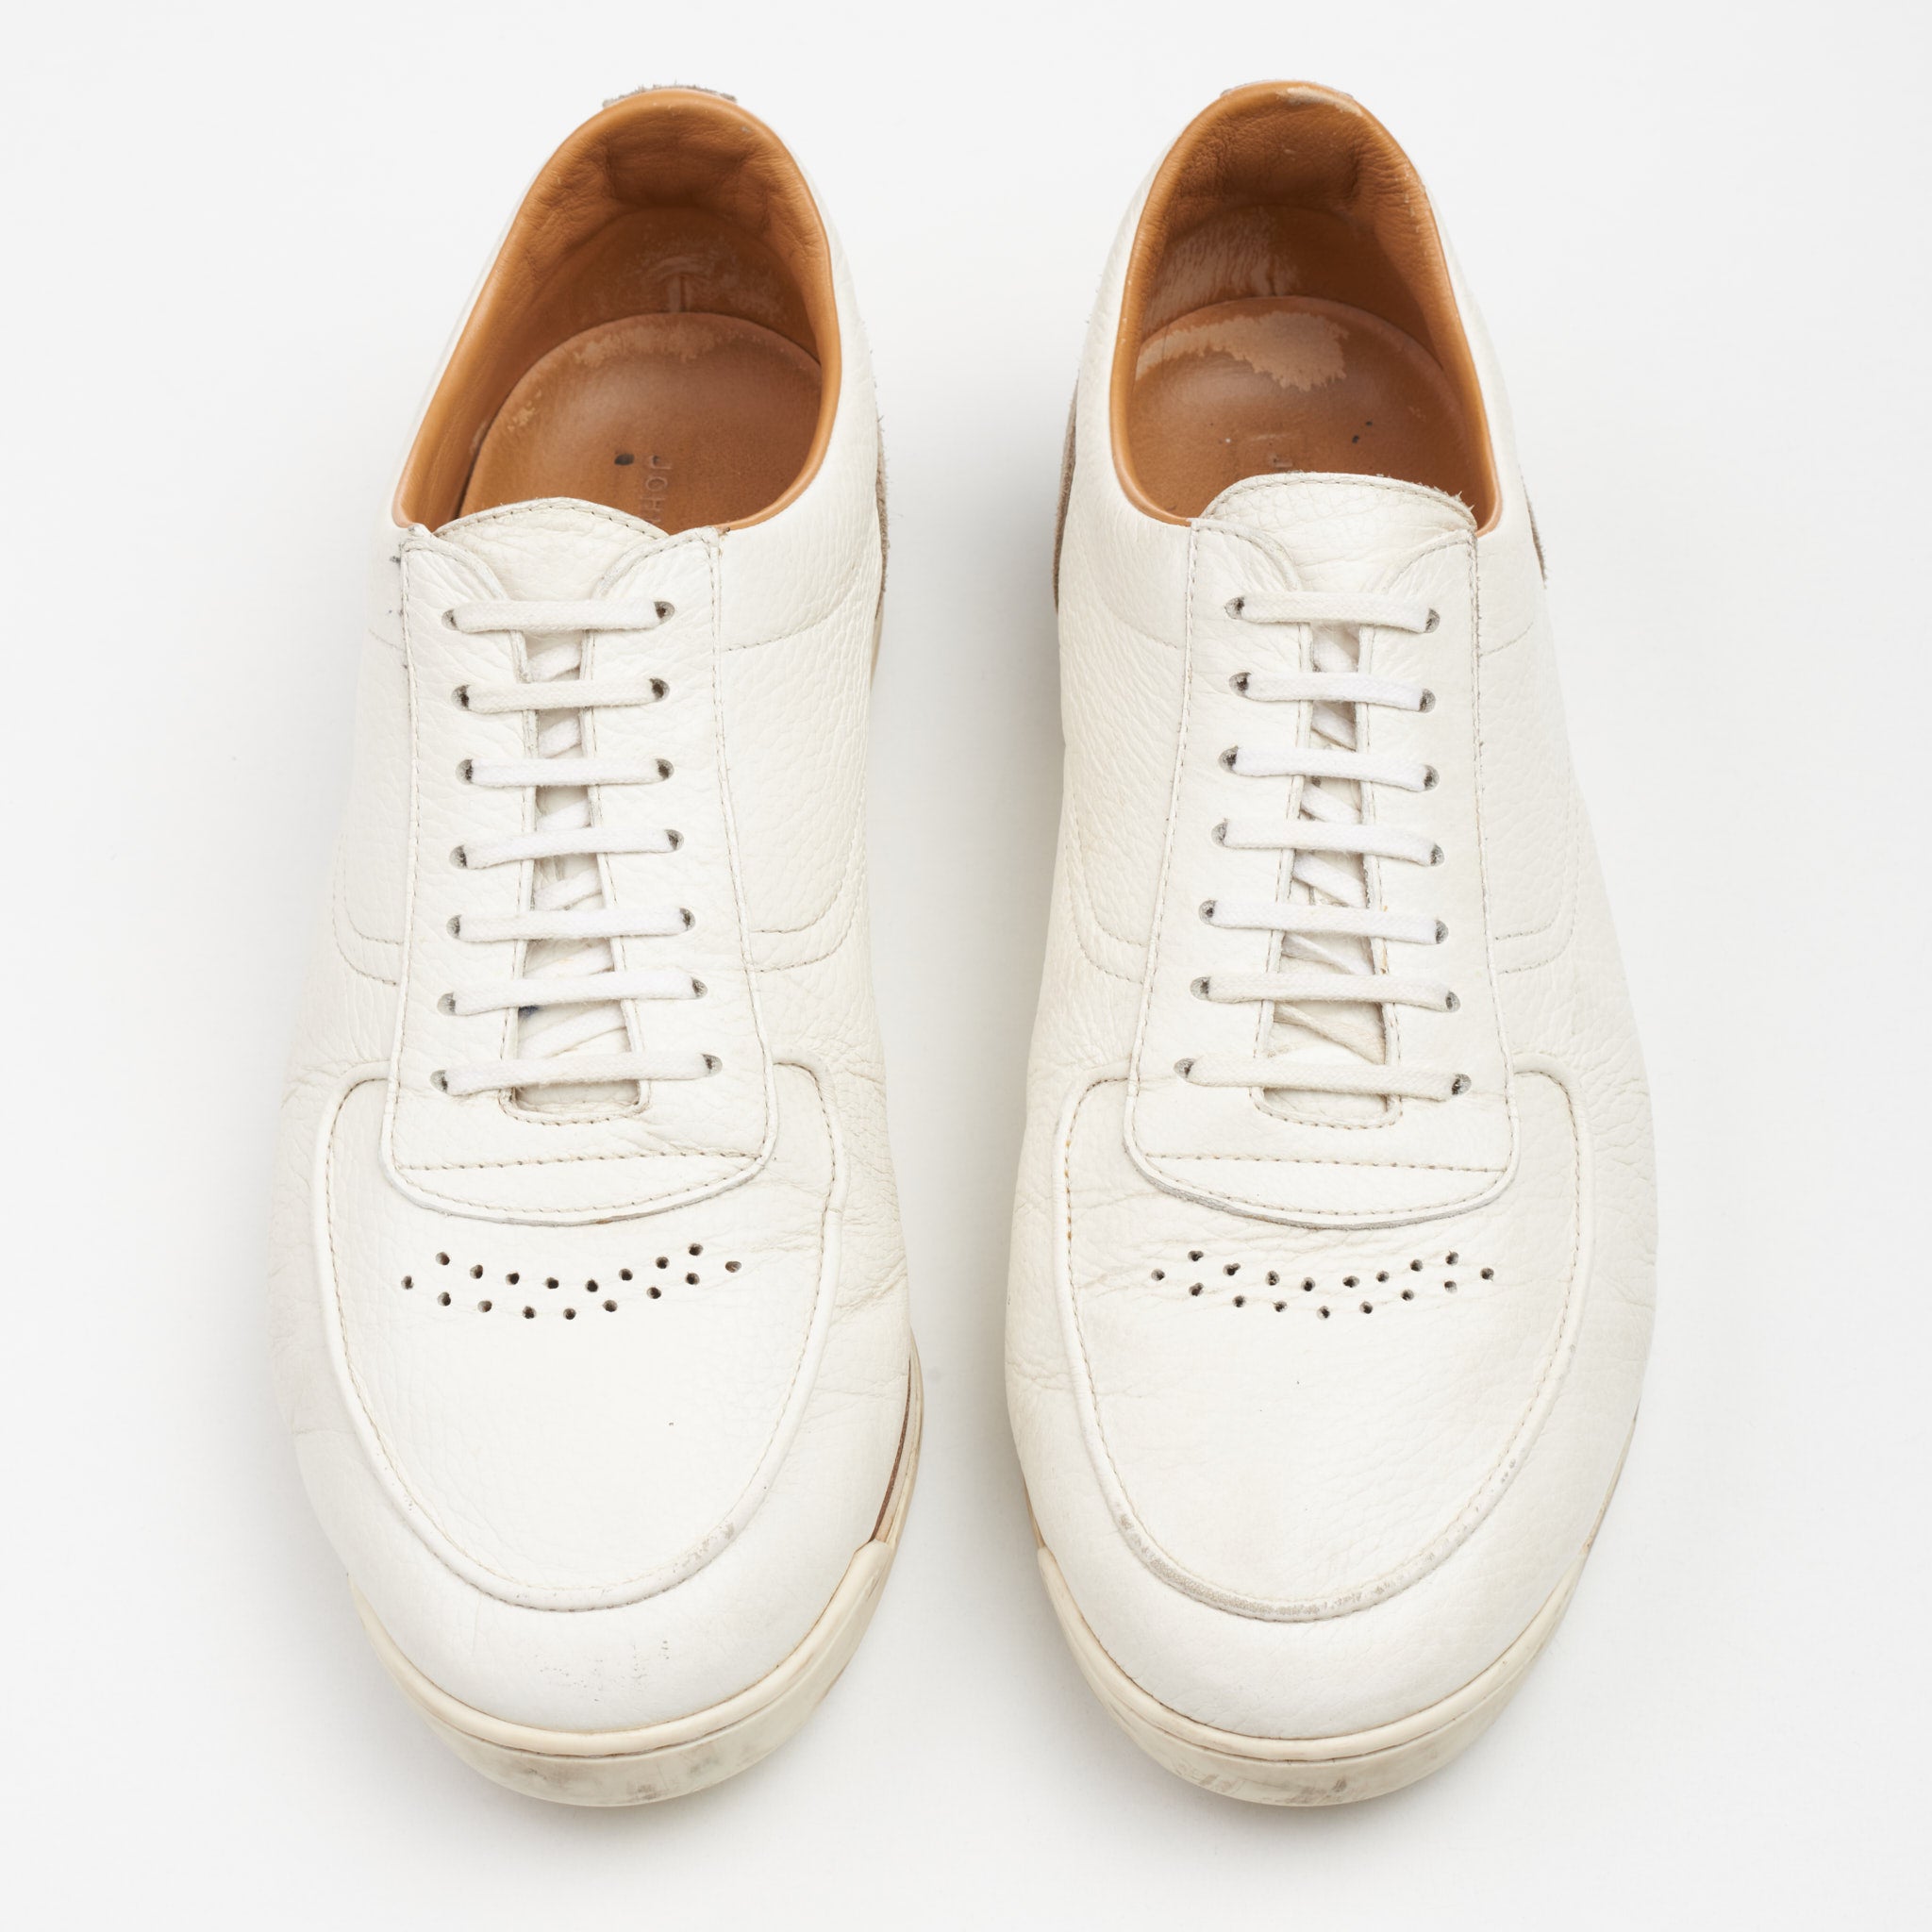 The Ashland Ave. Low Top Sneaker No. 4890 | Robert August